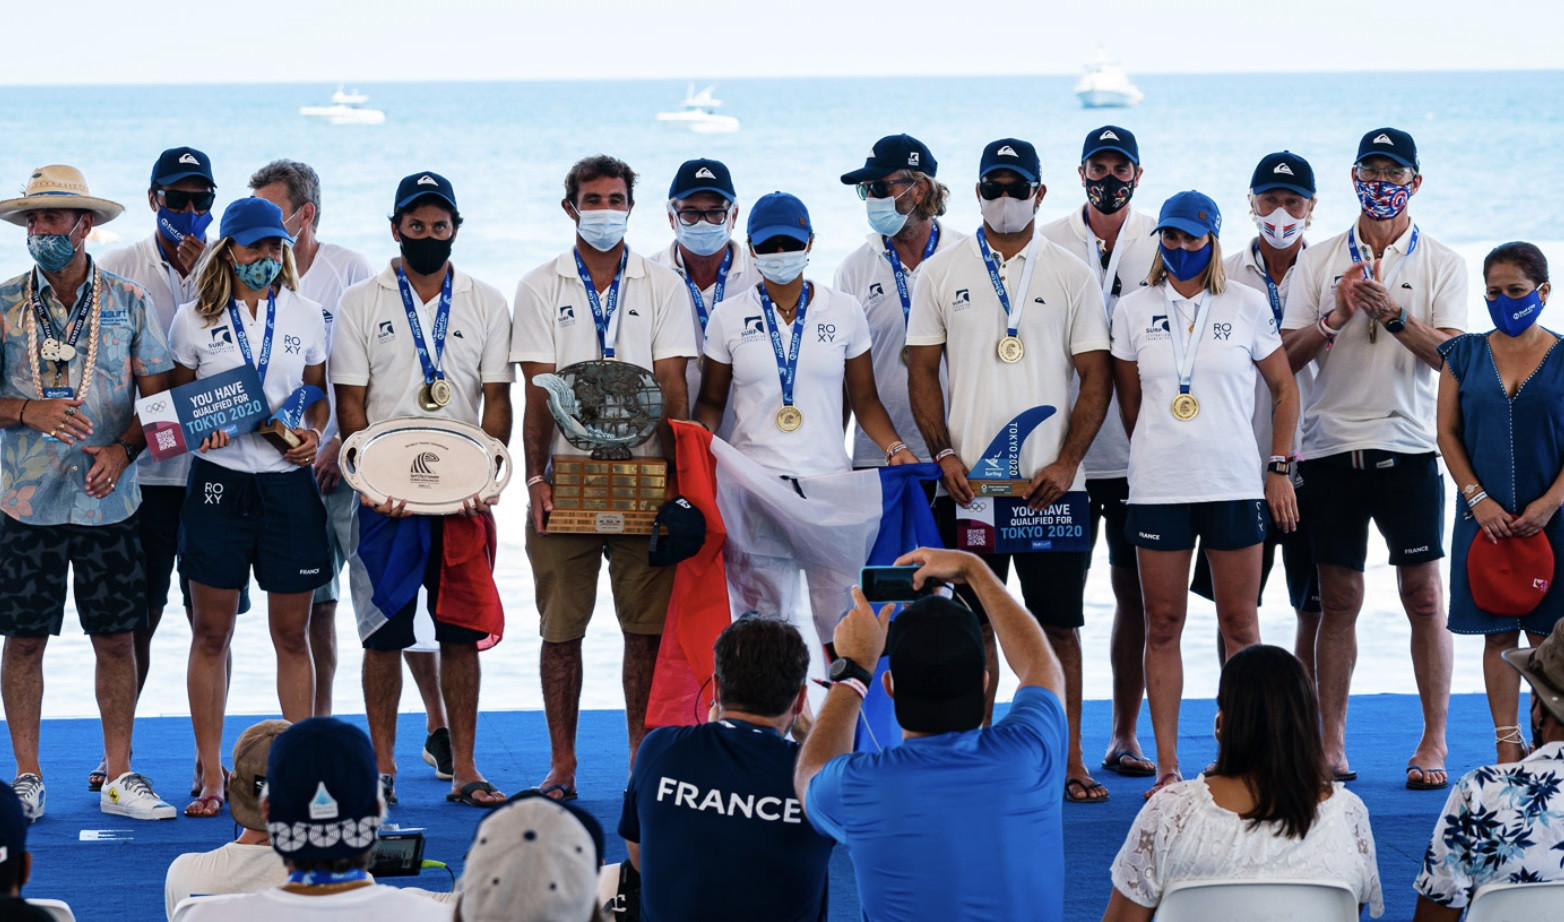 France won the team title when El Salvador staged last year's World Surfing Games ©ISA